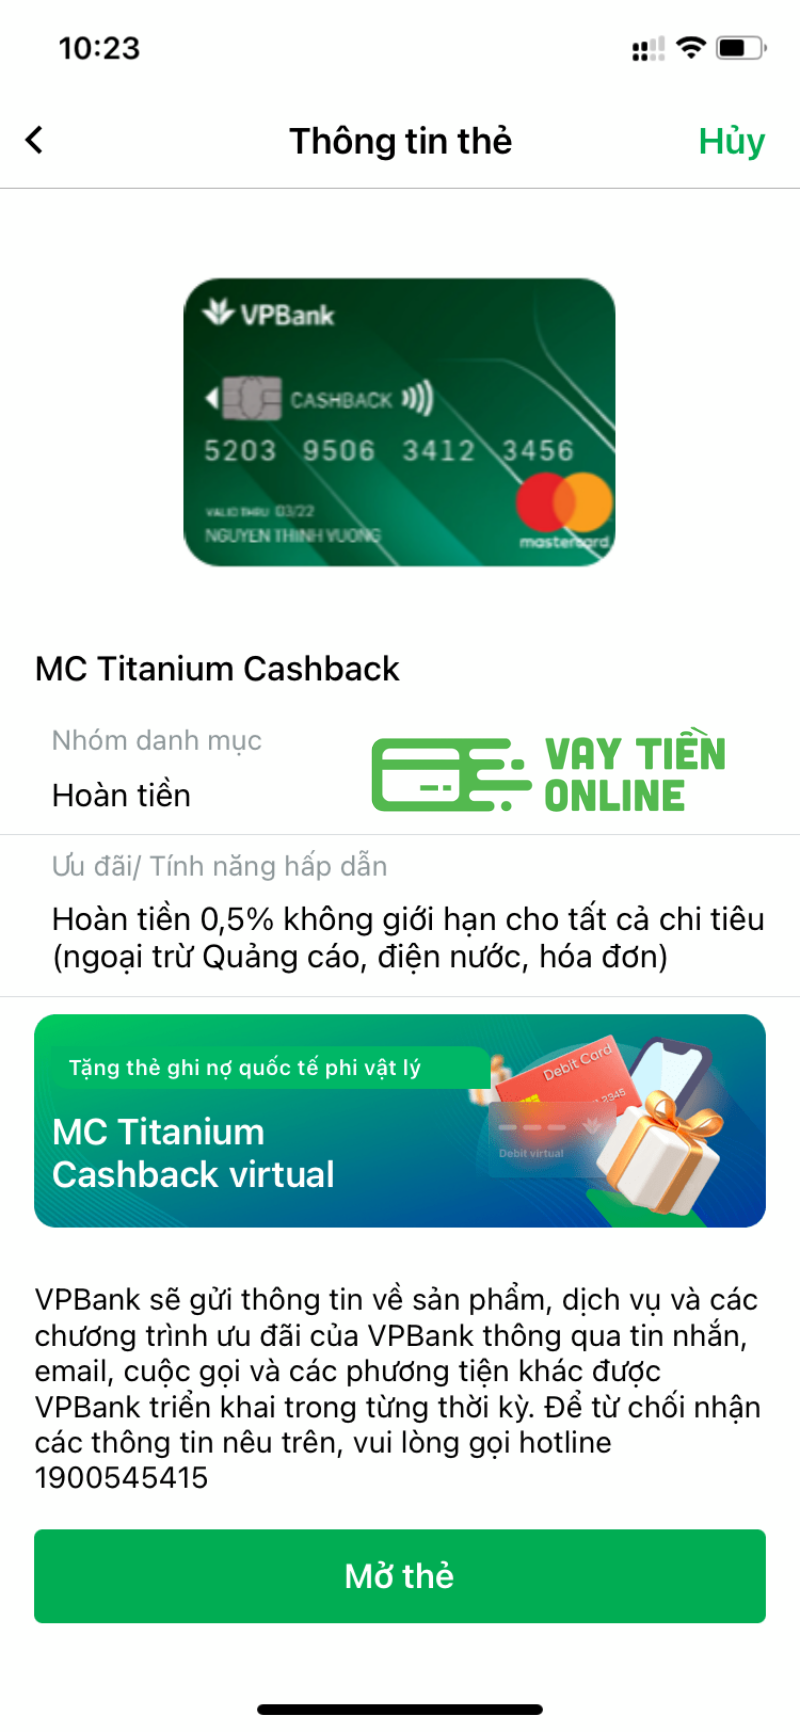 Mo the ghi no VPBank online 4 1